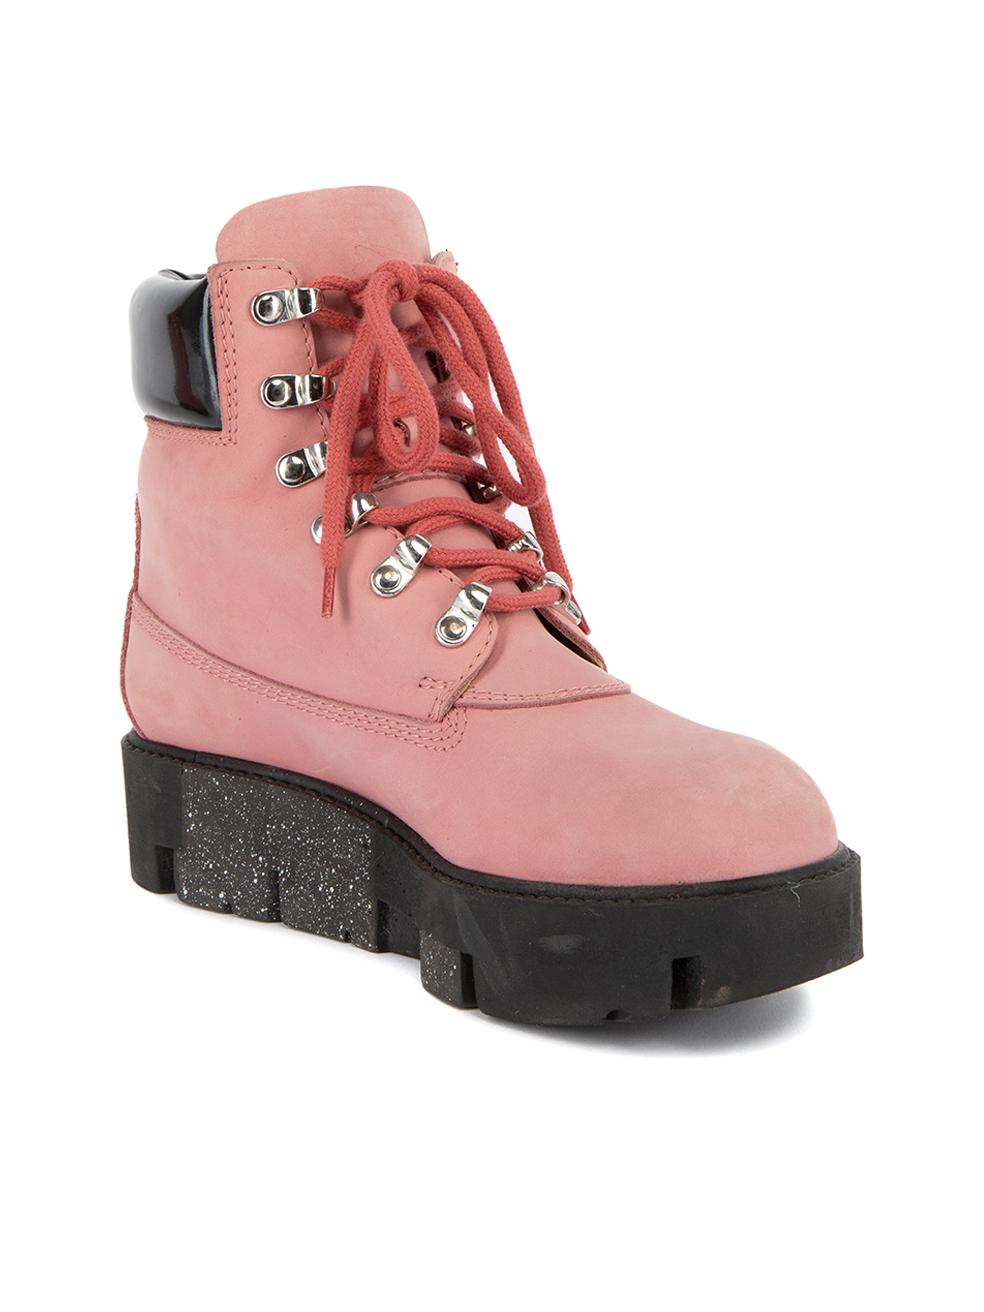 CONDITION is Very good. Minimal wear to boots is evident. Minimal wear to the exterior suede nubuck material where scuffs/marks and light creasing can be seen on this used Acne Studios designer resale item. Details Pink Suede Combat boots High top